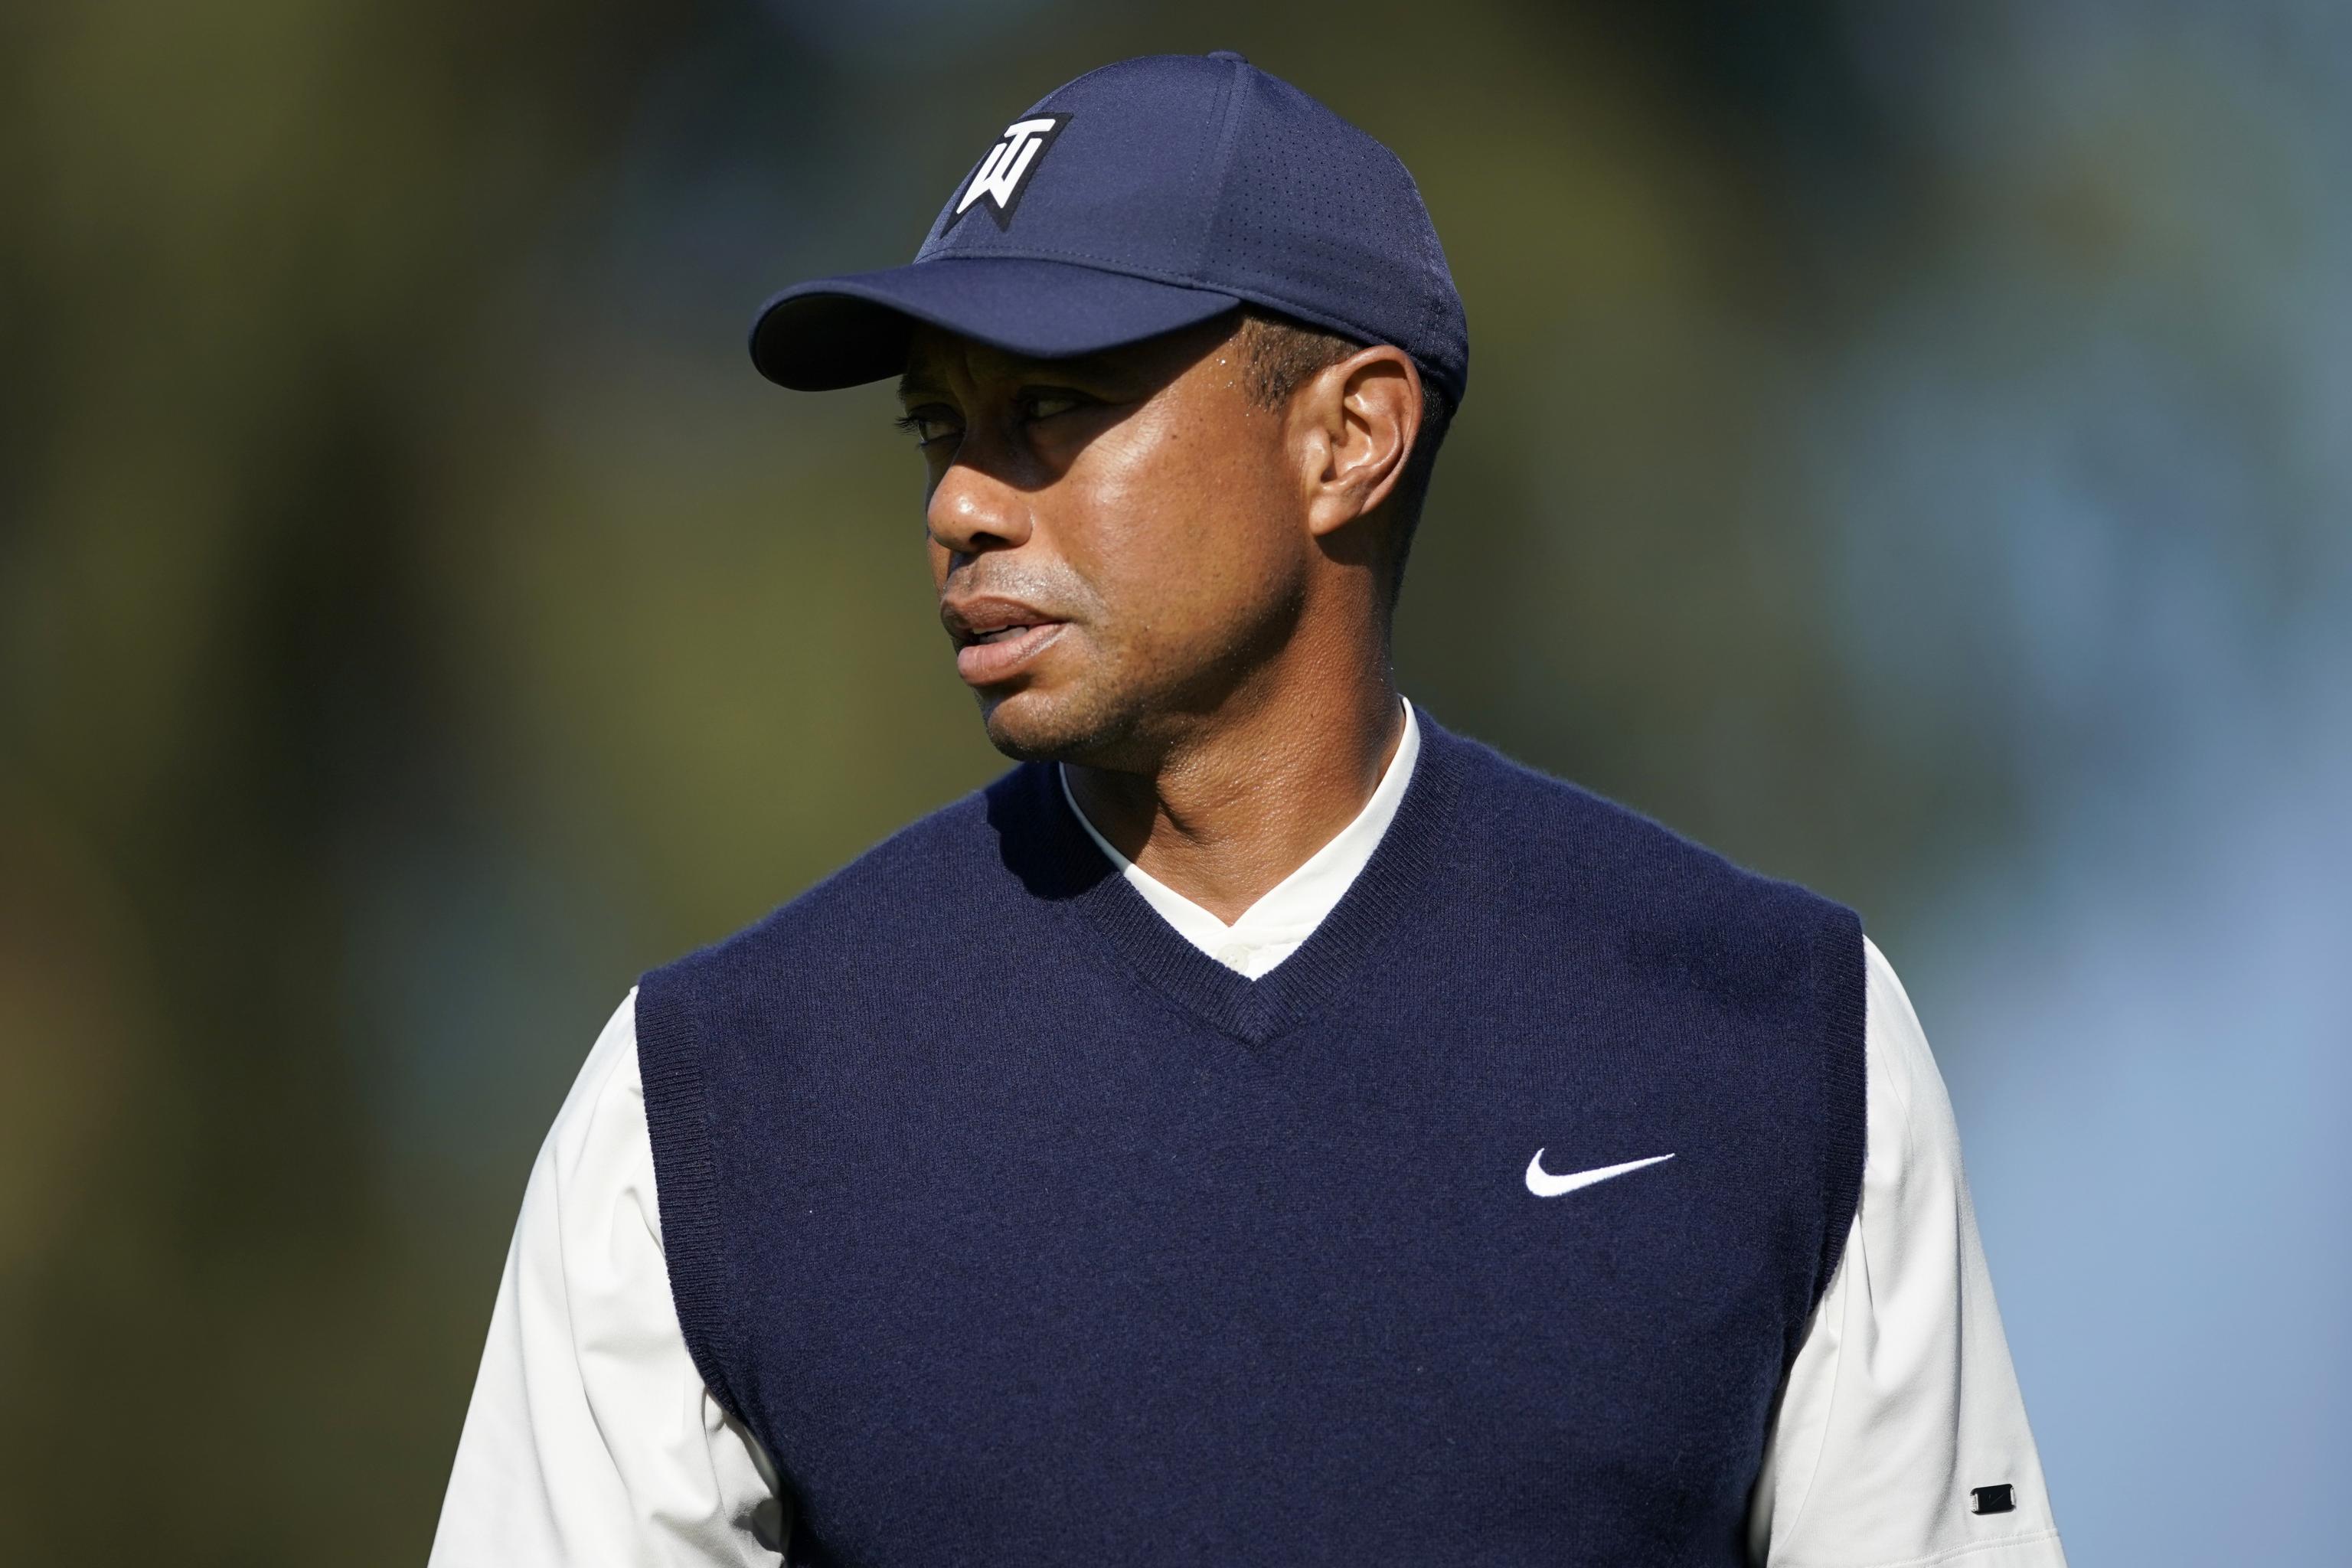 Tiger Woods says running 30 miles a week 'destroyed' body 